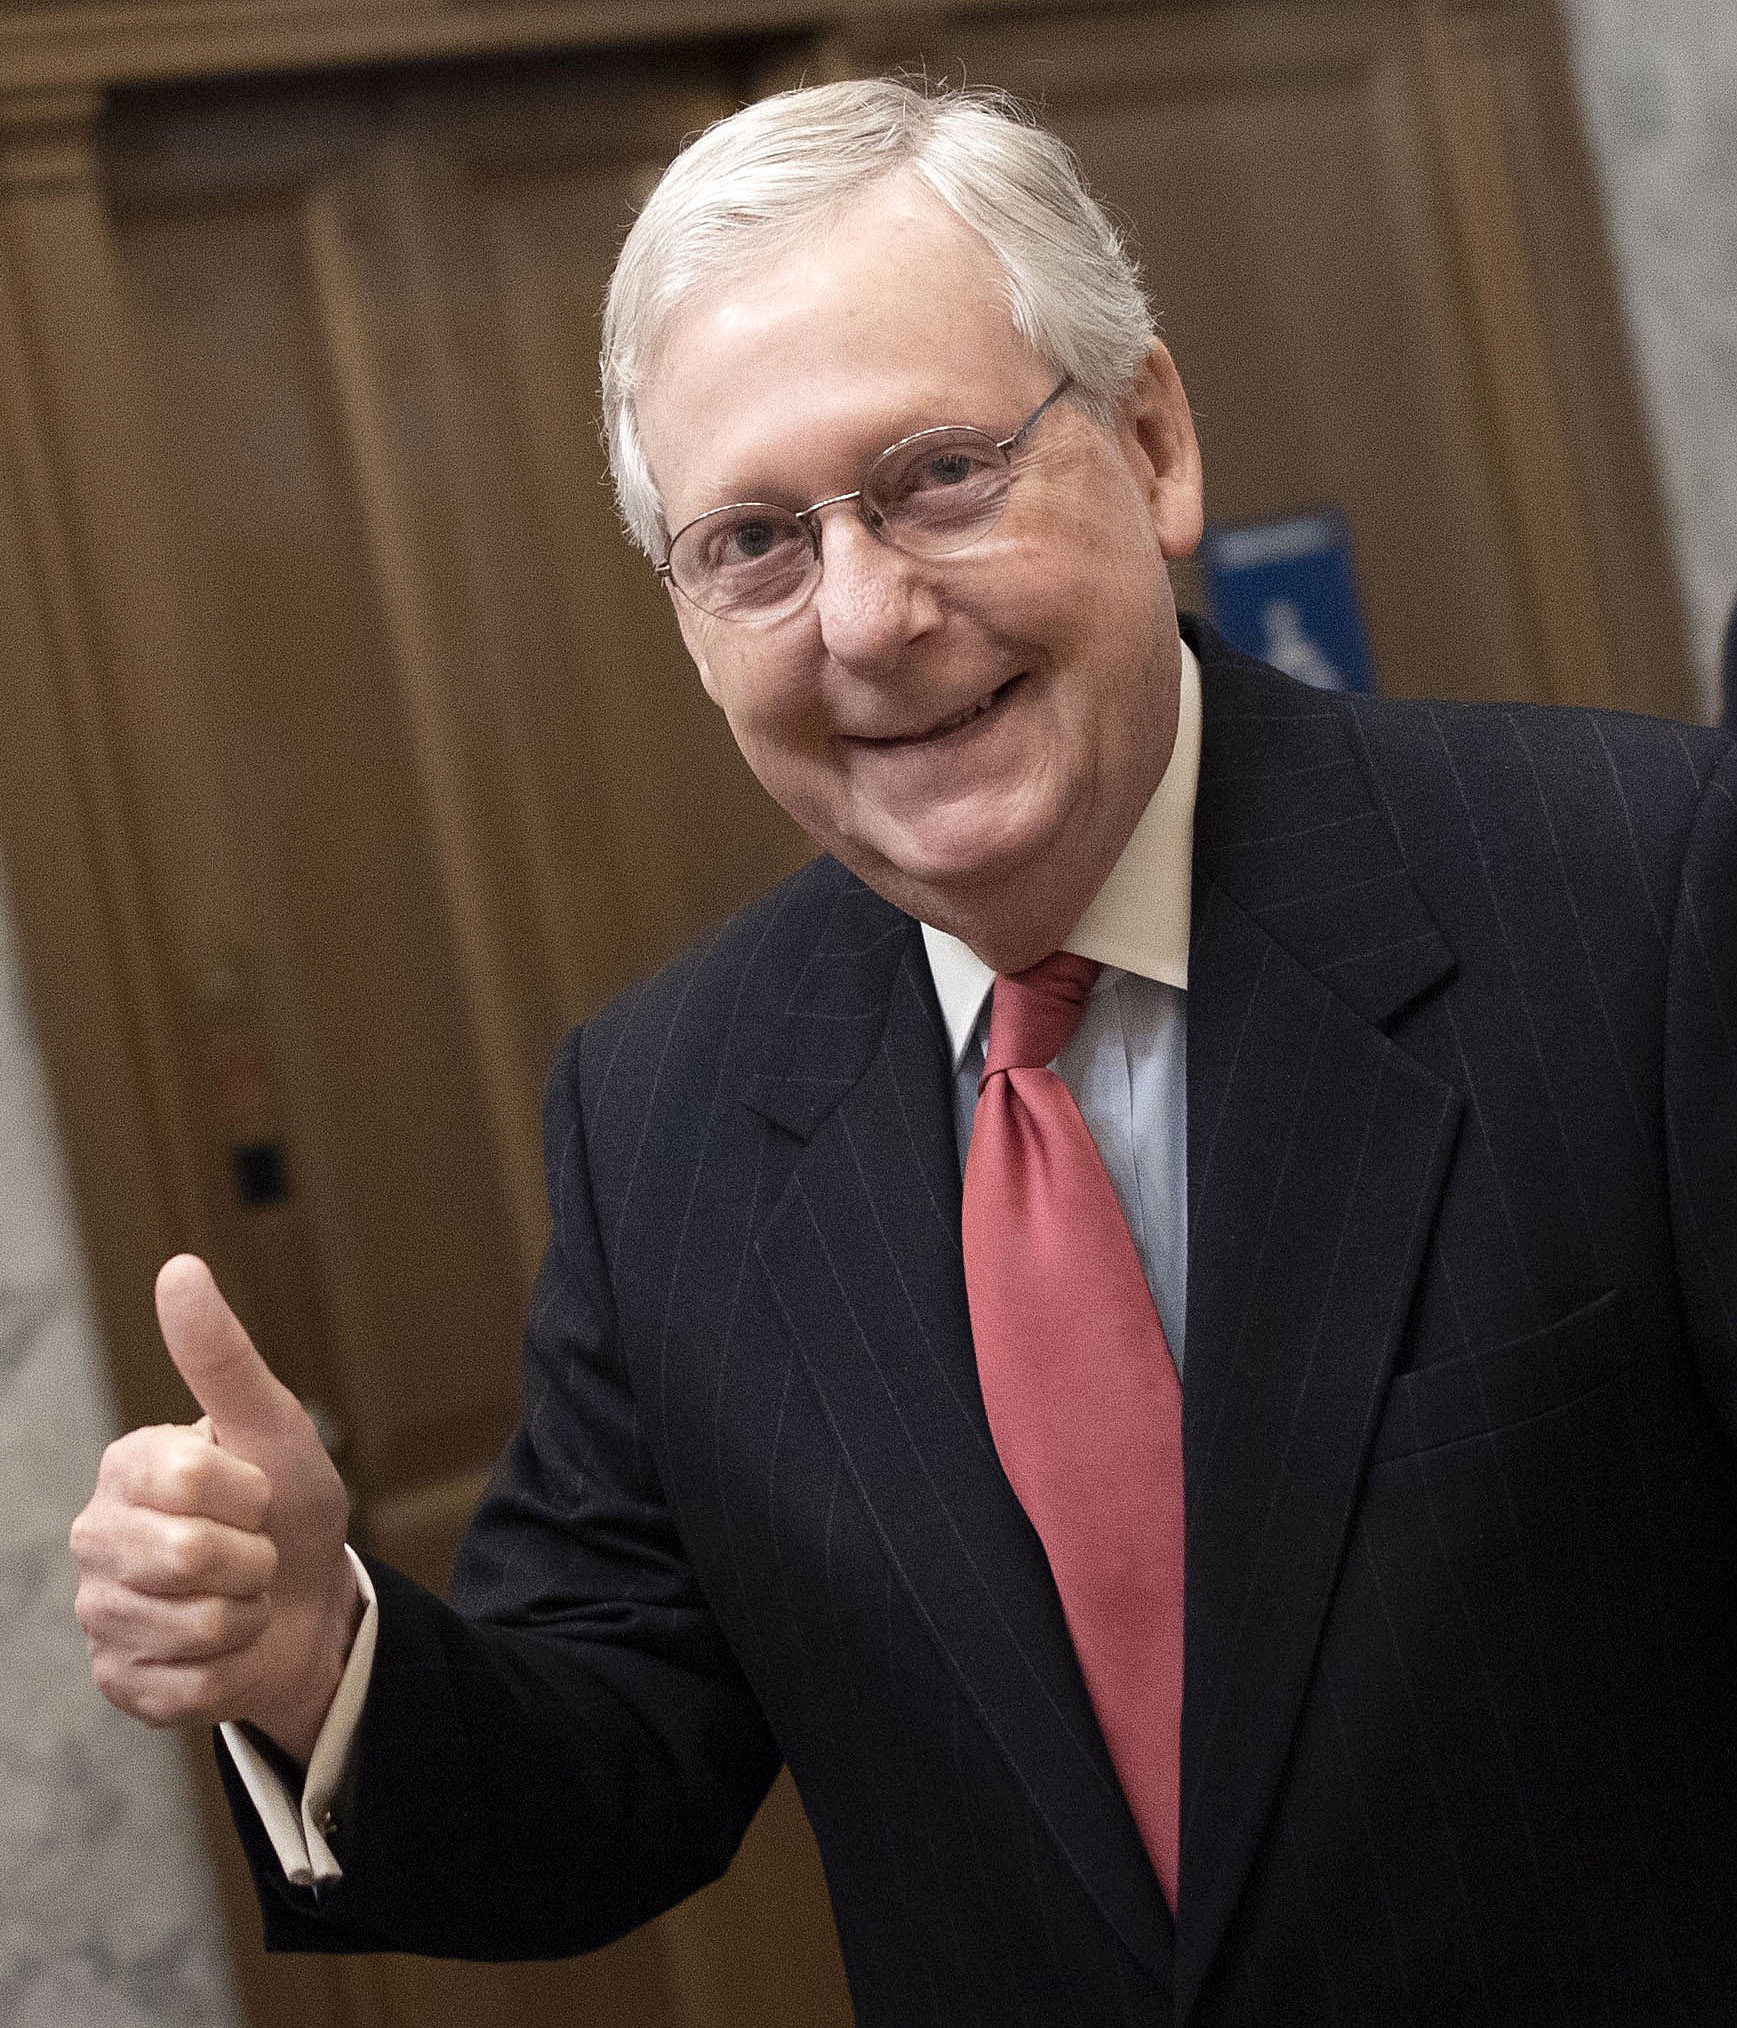 Happy Mitch McConnell - We Let You Go, Sir - Game Over - We Are Done With You and Your Whole Team - We Let You All Go - We Fired Your Corrupt Supreme Court - We Peacefully and Nonviolently Fired Washington, D.C. - Peace Be With You All - You All Had Too Much Power Over All the Rest of Us - The Private Sector Let You All Go - Enjoy Your Retirement - Relax - Enjoy Yourself - Have Fun - Your Authority is Null and Void - You Are a Civilian Retired Person Now - It Is Our Oil, Coal and Gas Now - We Will Leave It in the Ground as Much as Possible - The Internet is Free - Electricity is Free - Electric Transportation is Free - Computers Will Pay for Everything Going Forward - We Are All Retired Homeowners as a Worldwide Matter of Global Constitutional Law - We Don't Do Taxes, Debt or Property Rental Any More - No More Bills at All for Anybody Anywhere - That's Just the Way It Is - We Are Americans Who Are Sick of the Corruption in Washington, D.C. - We FIRED Them All - We Will Reward All of the Citizens - We Are Loyal to the Citizens - We Believe in Real Democracy